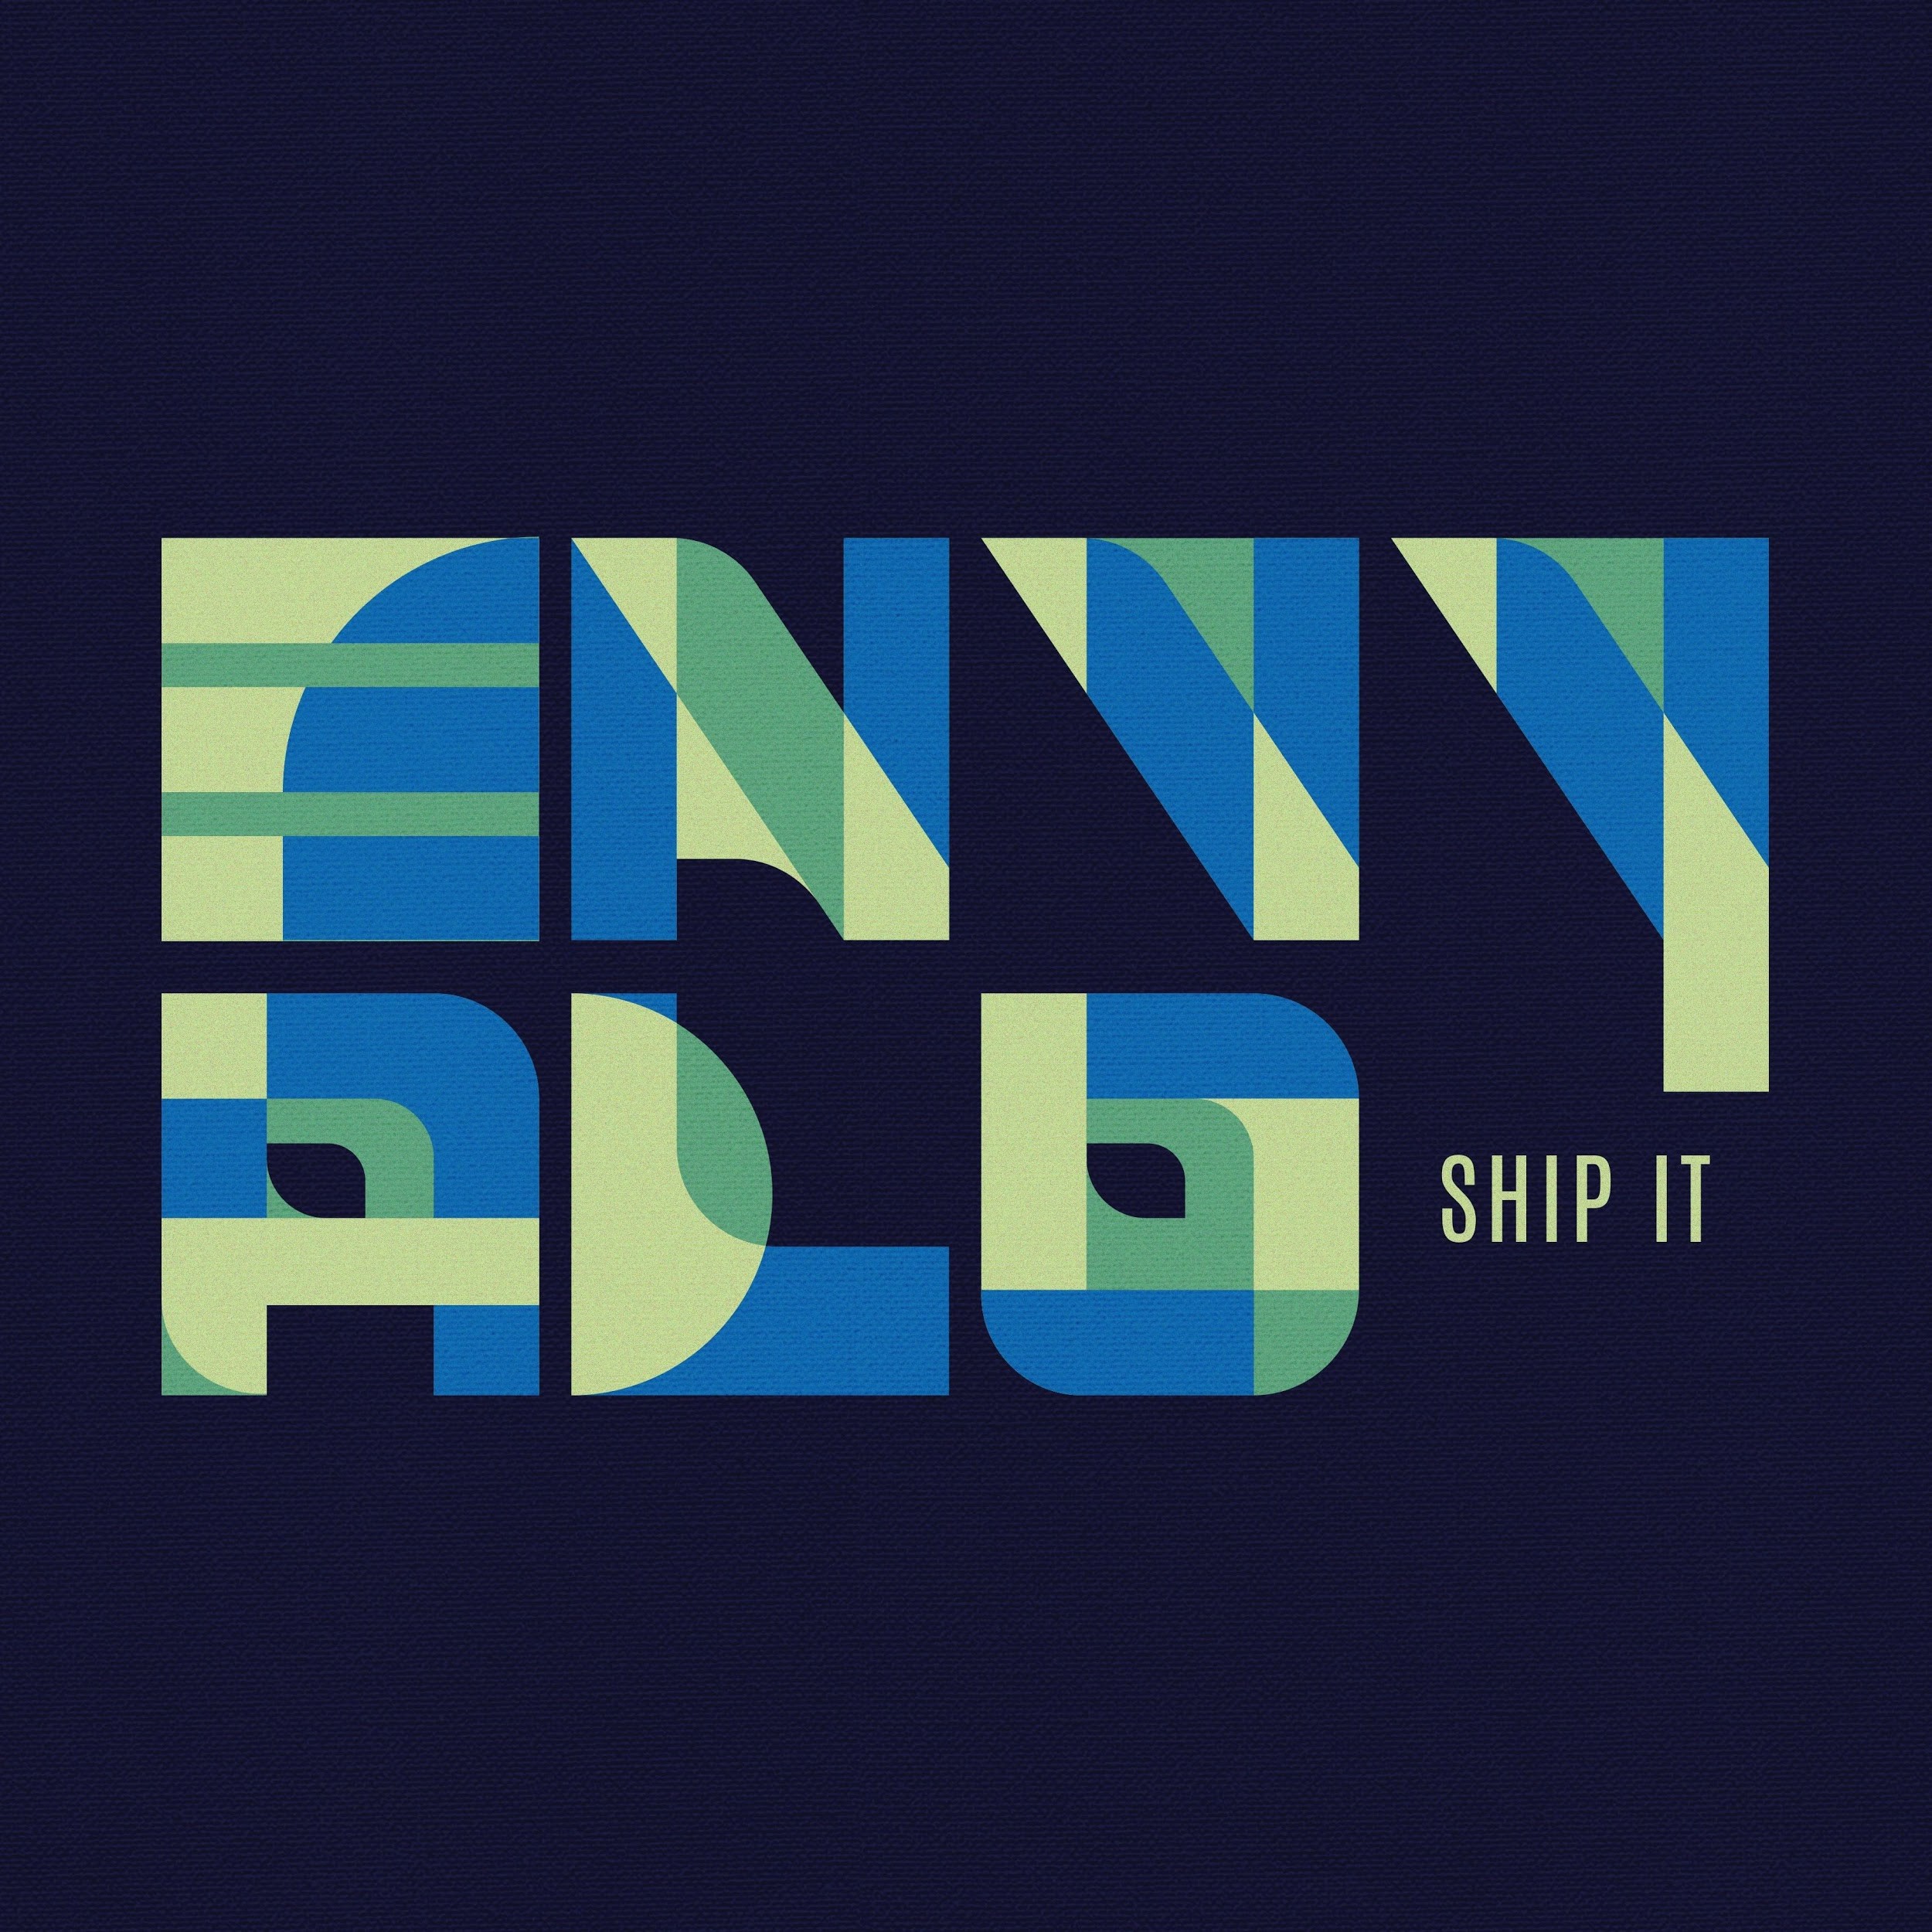 Envy Alo to Release New Studio Album “Ship It” on January 17, 2020